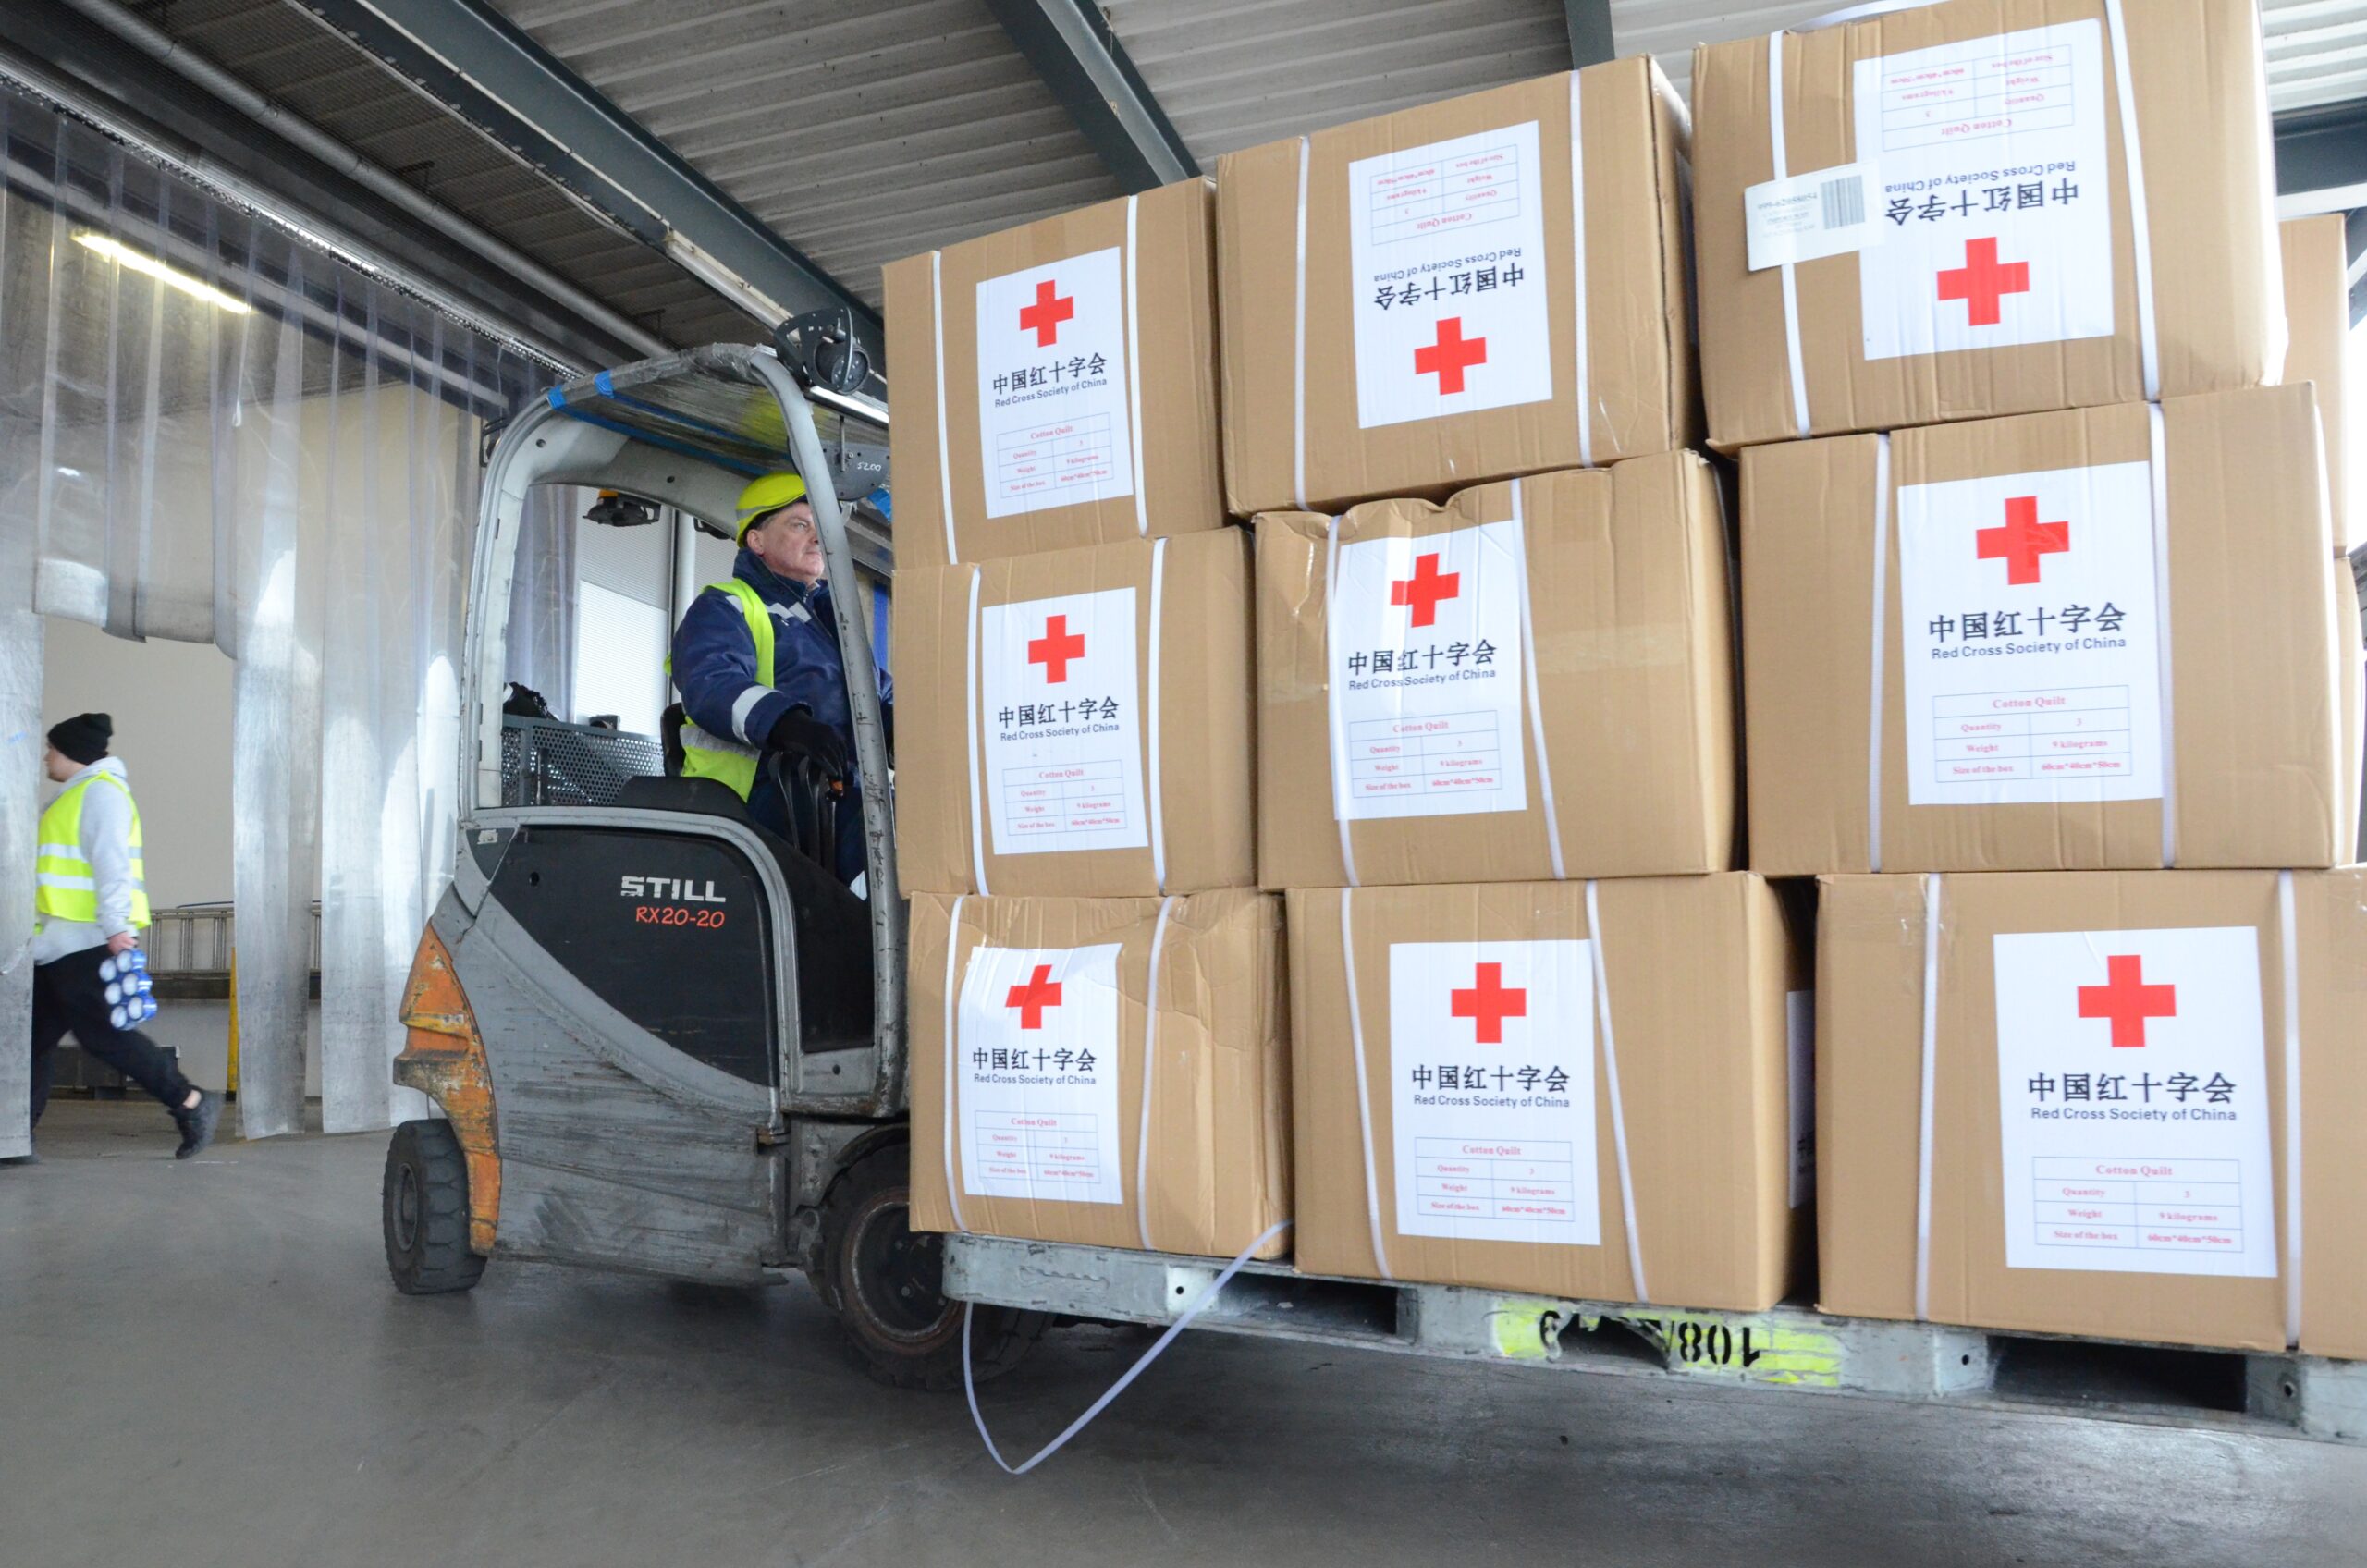 Humanitarian aid supplies sent by the Red Cross Society of China to the Ukrainian Red Cross Society are transported in Warsaw, Poland, March 15, 2022. The Red Cross Society of China announced Monday that it has sent a third batch of emergency humanitarian aid supplies to the Ukrainian Red Cross Society.   The new supplies, including milk powder for children and quilts, left Beijing on Monday and arrived in Warsaw, Poland. They will then be transported to Ukraine. (Photo by Chen Chen/Xinhua via Getty Images)